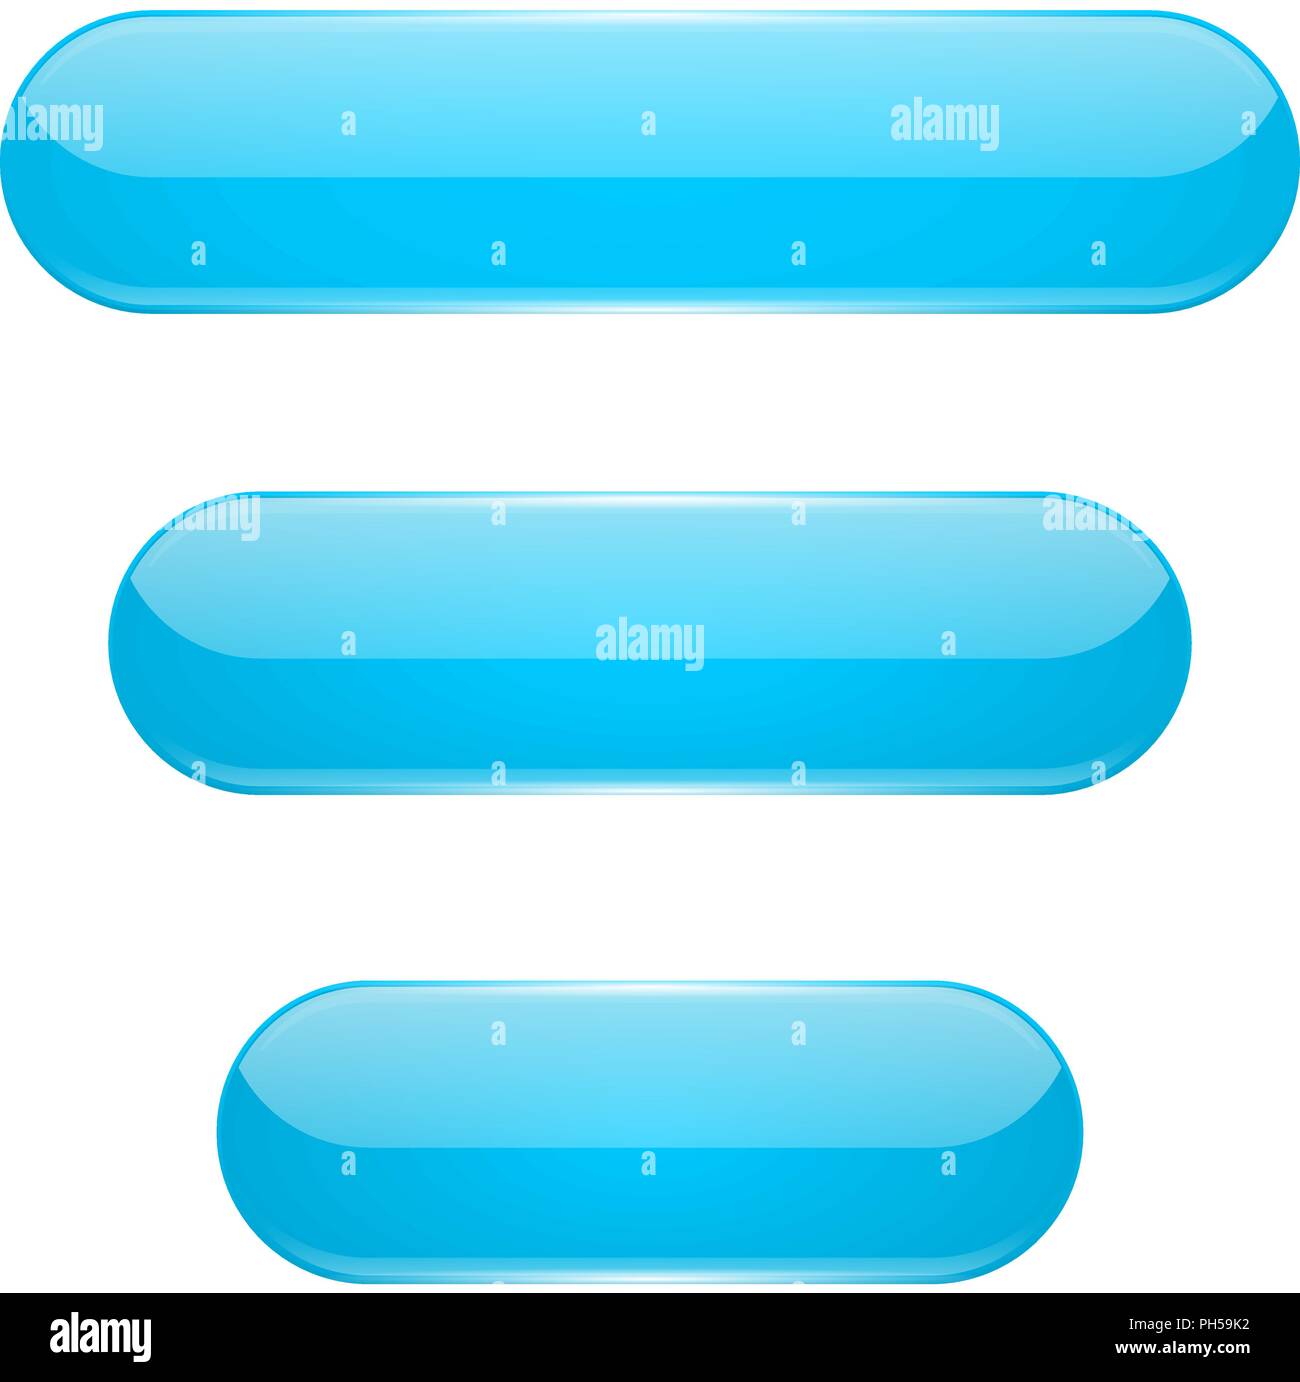 Blue oval buttons. 3d glass menu icons Stock Vector